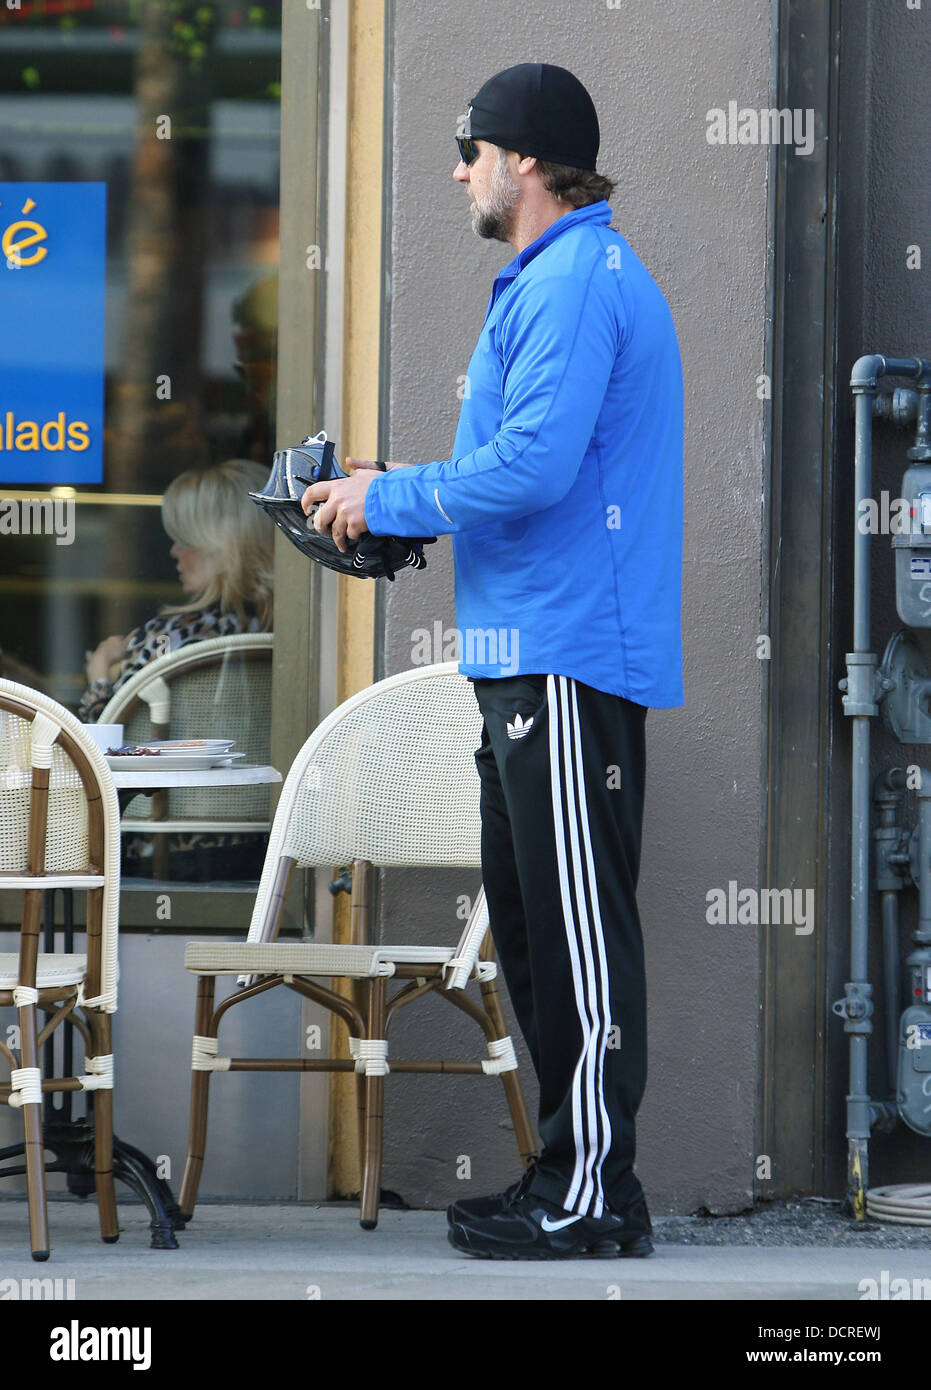 Russell Crowe dressed in adidas sportswear goes cycling in Beverly Hills.  Los Angeles, California - 15.11.11 Stock Photo - Alamy